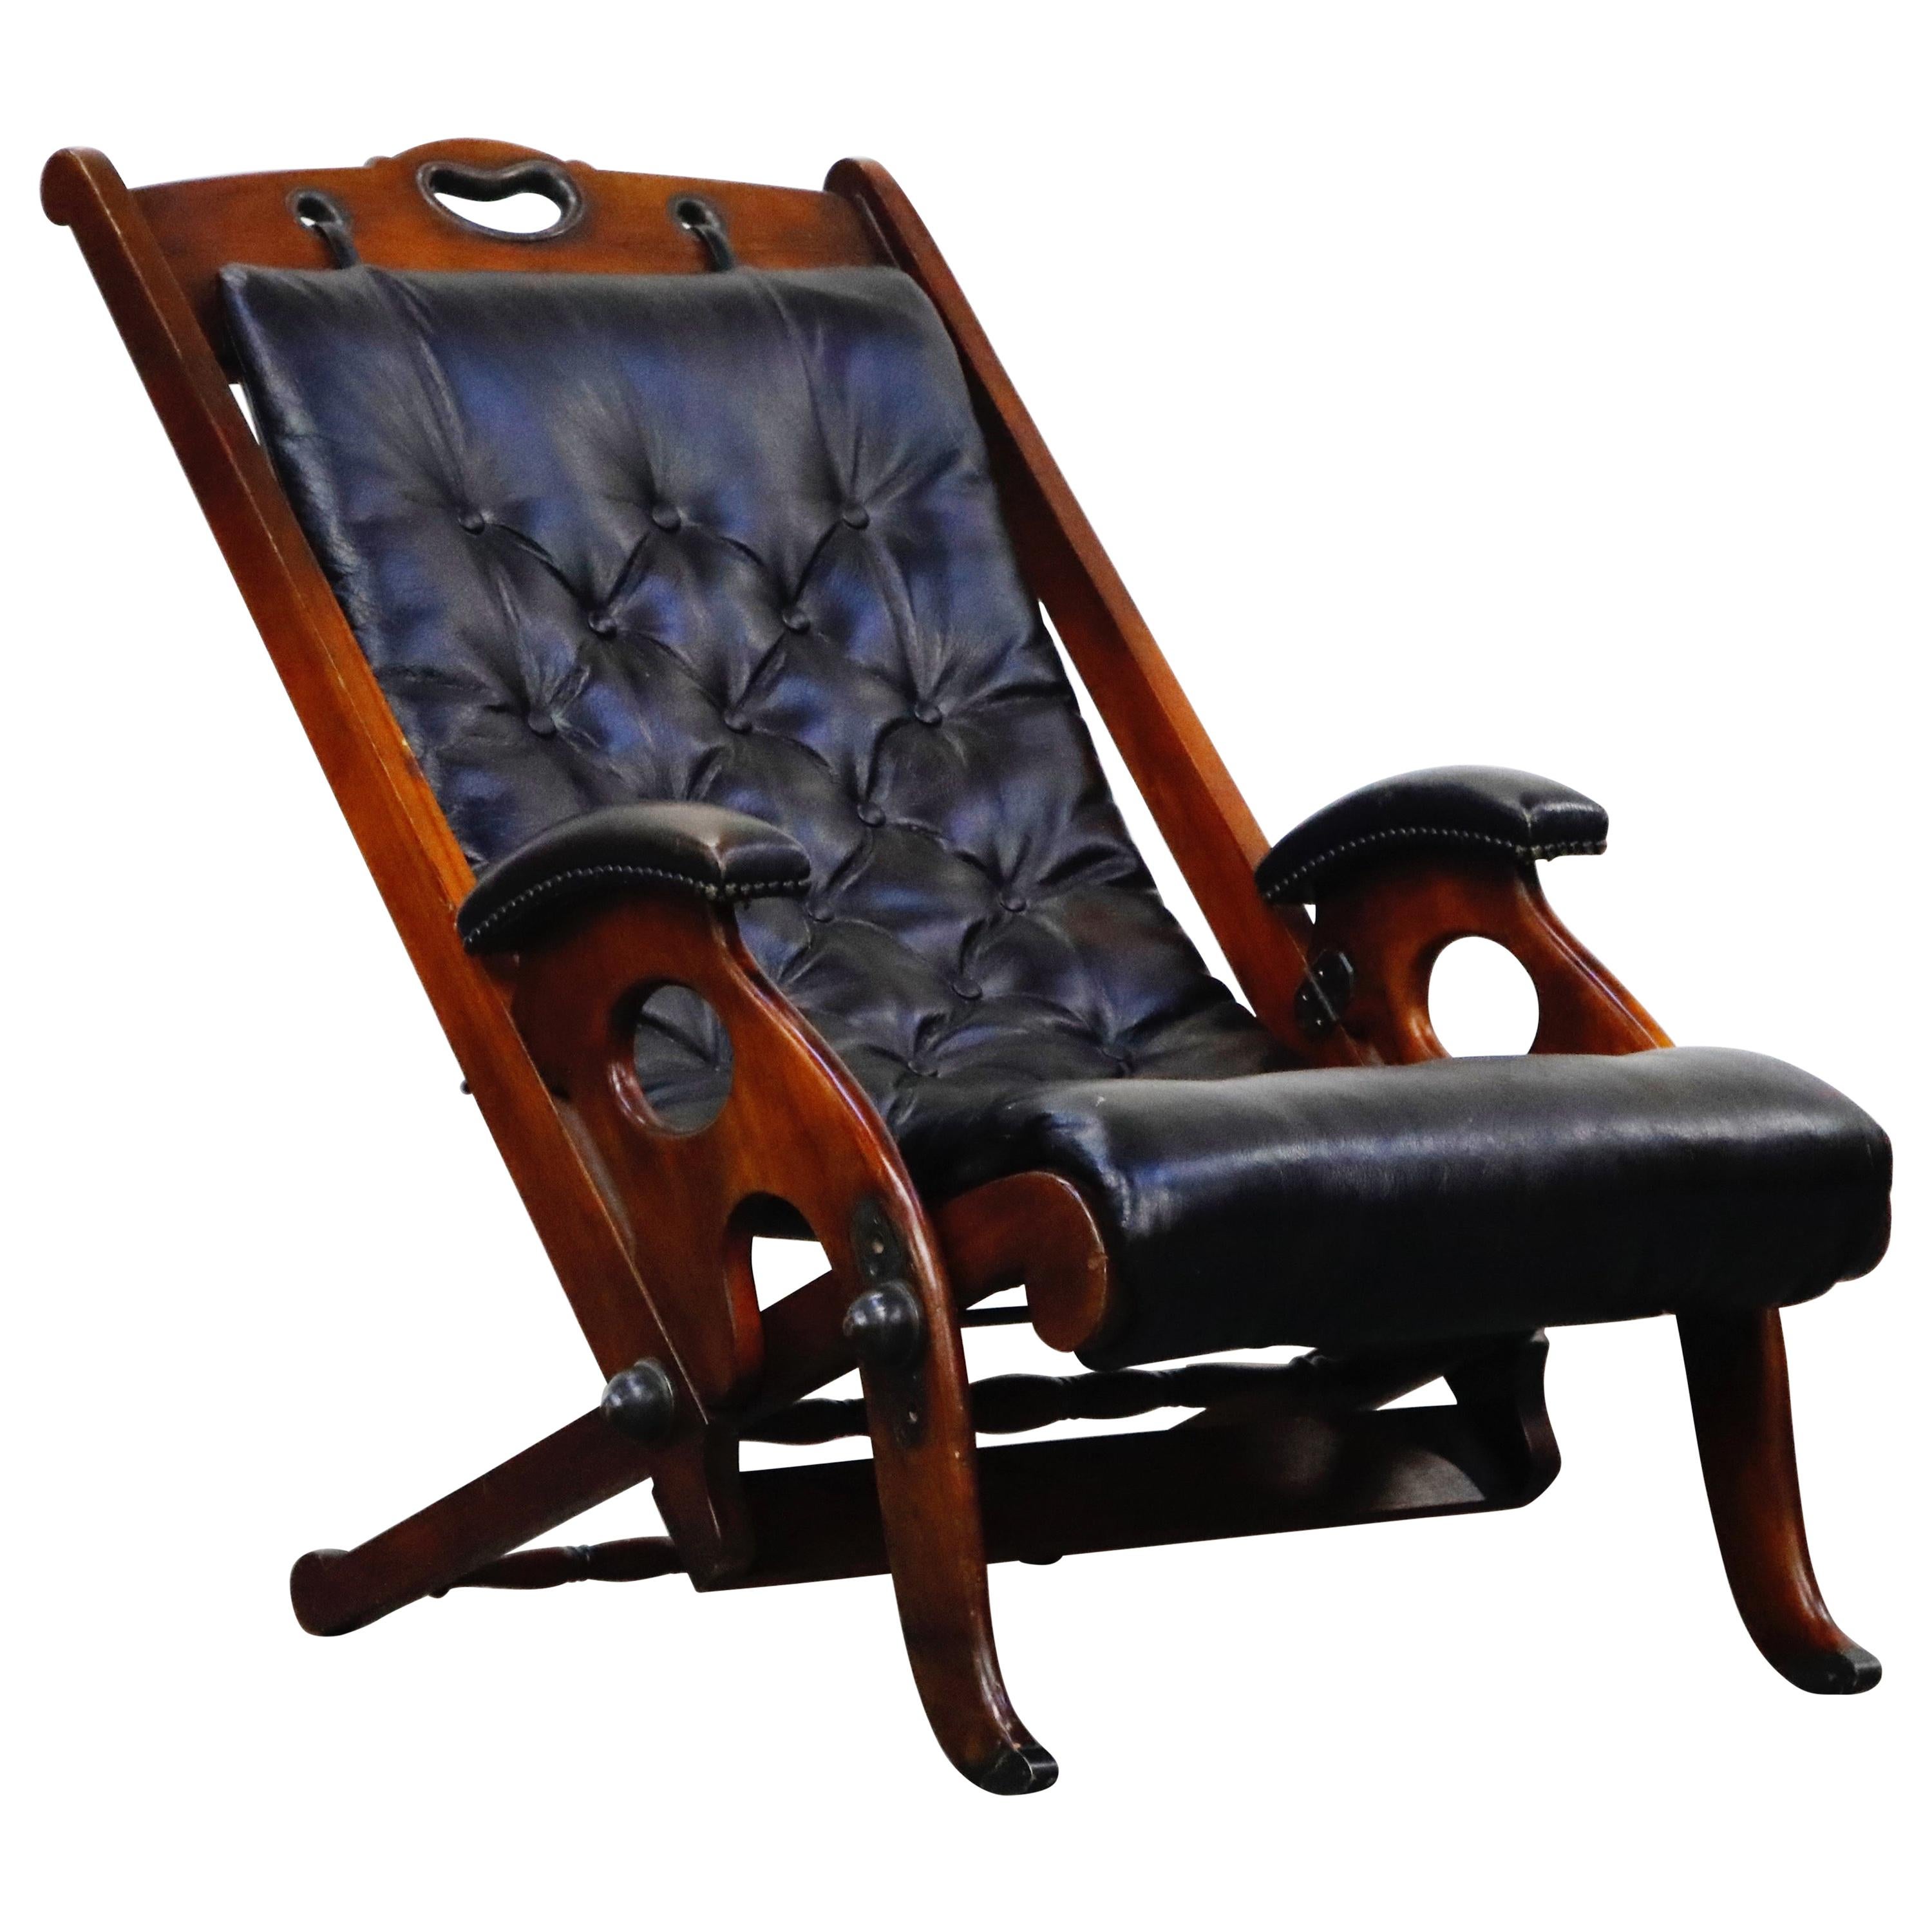 Antique Tufted Leather Folding Campaign Library Recliner Chair, circa 1900